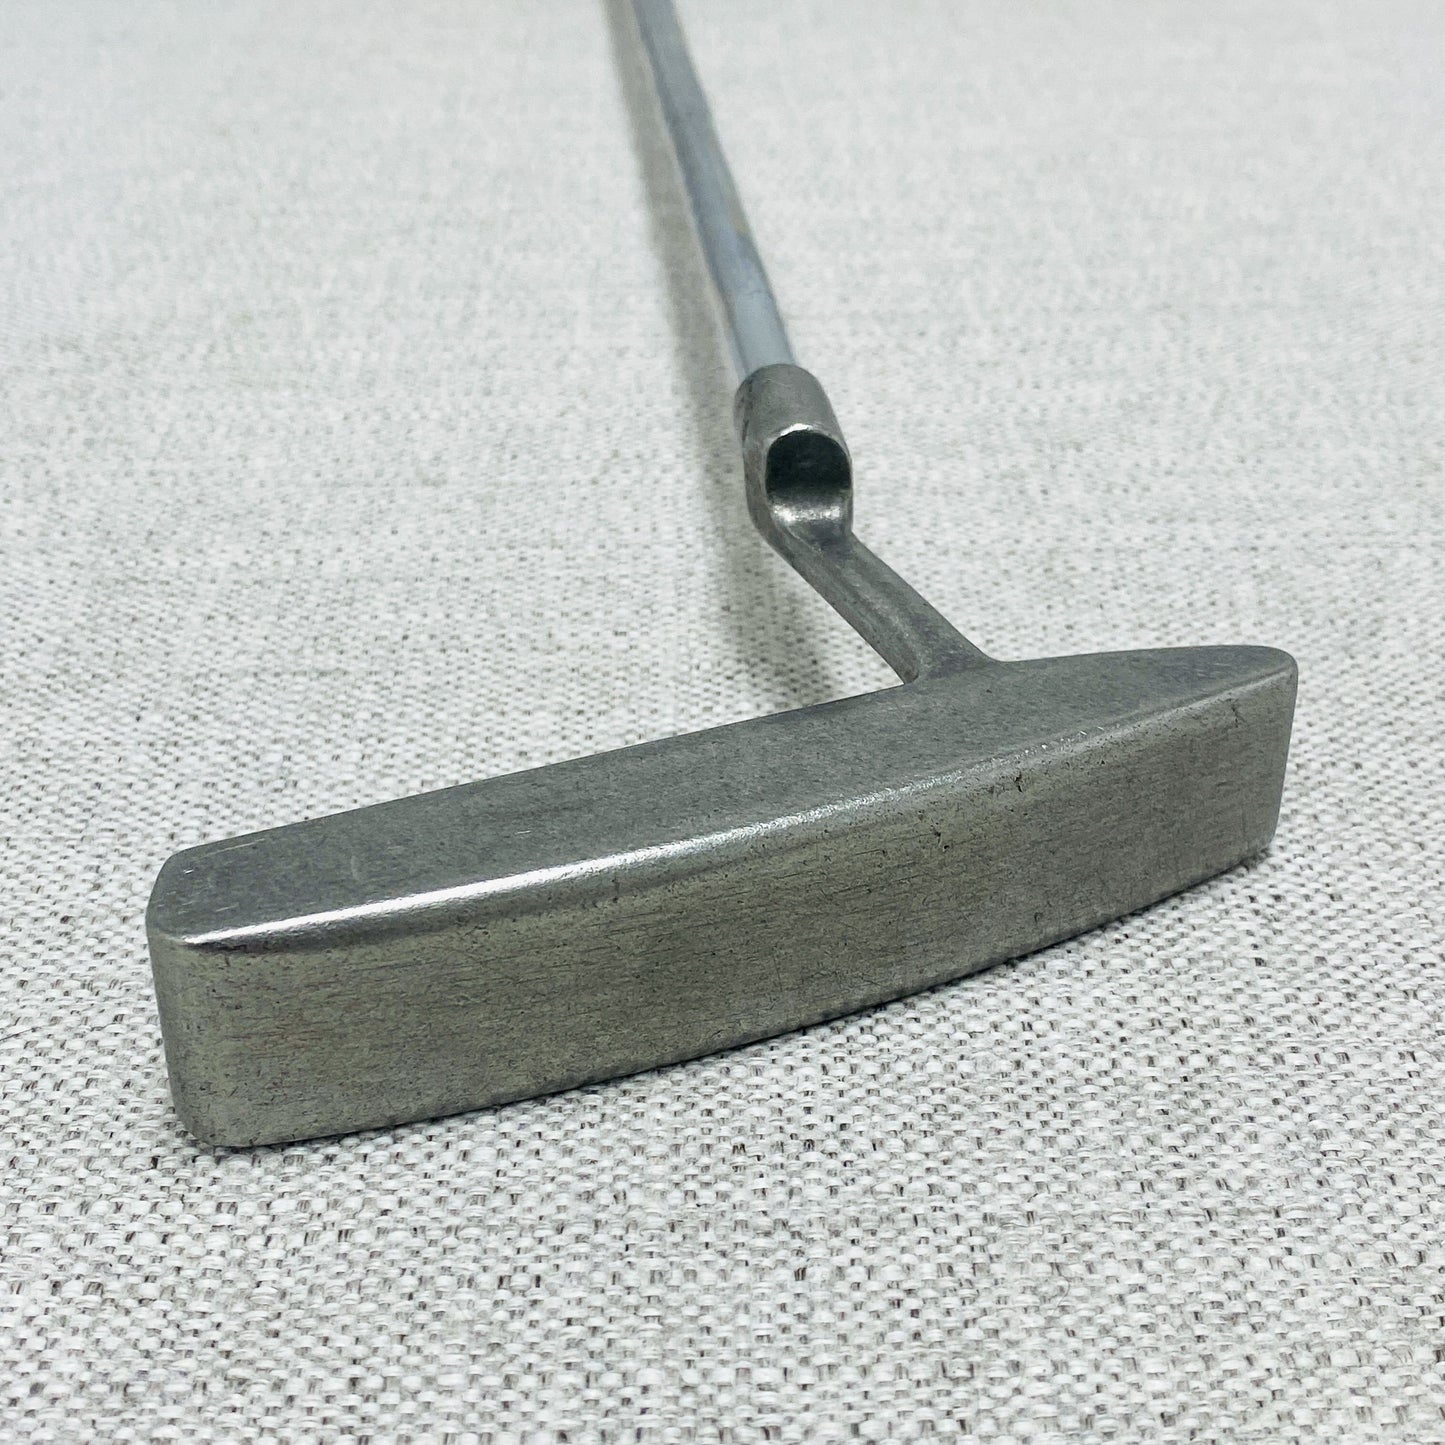 PING Pal 4 Stainless Putter. 35 inch - Very Good Condition # T1011